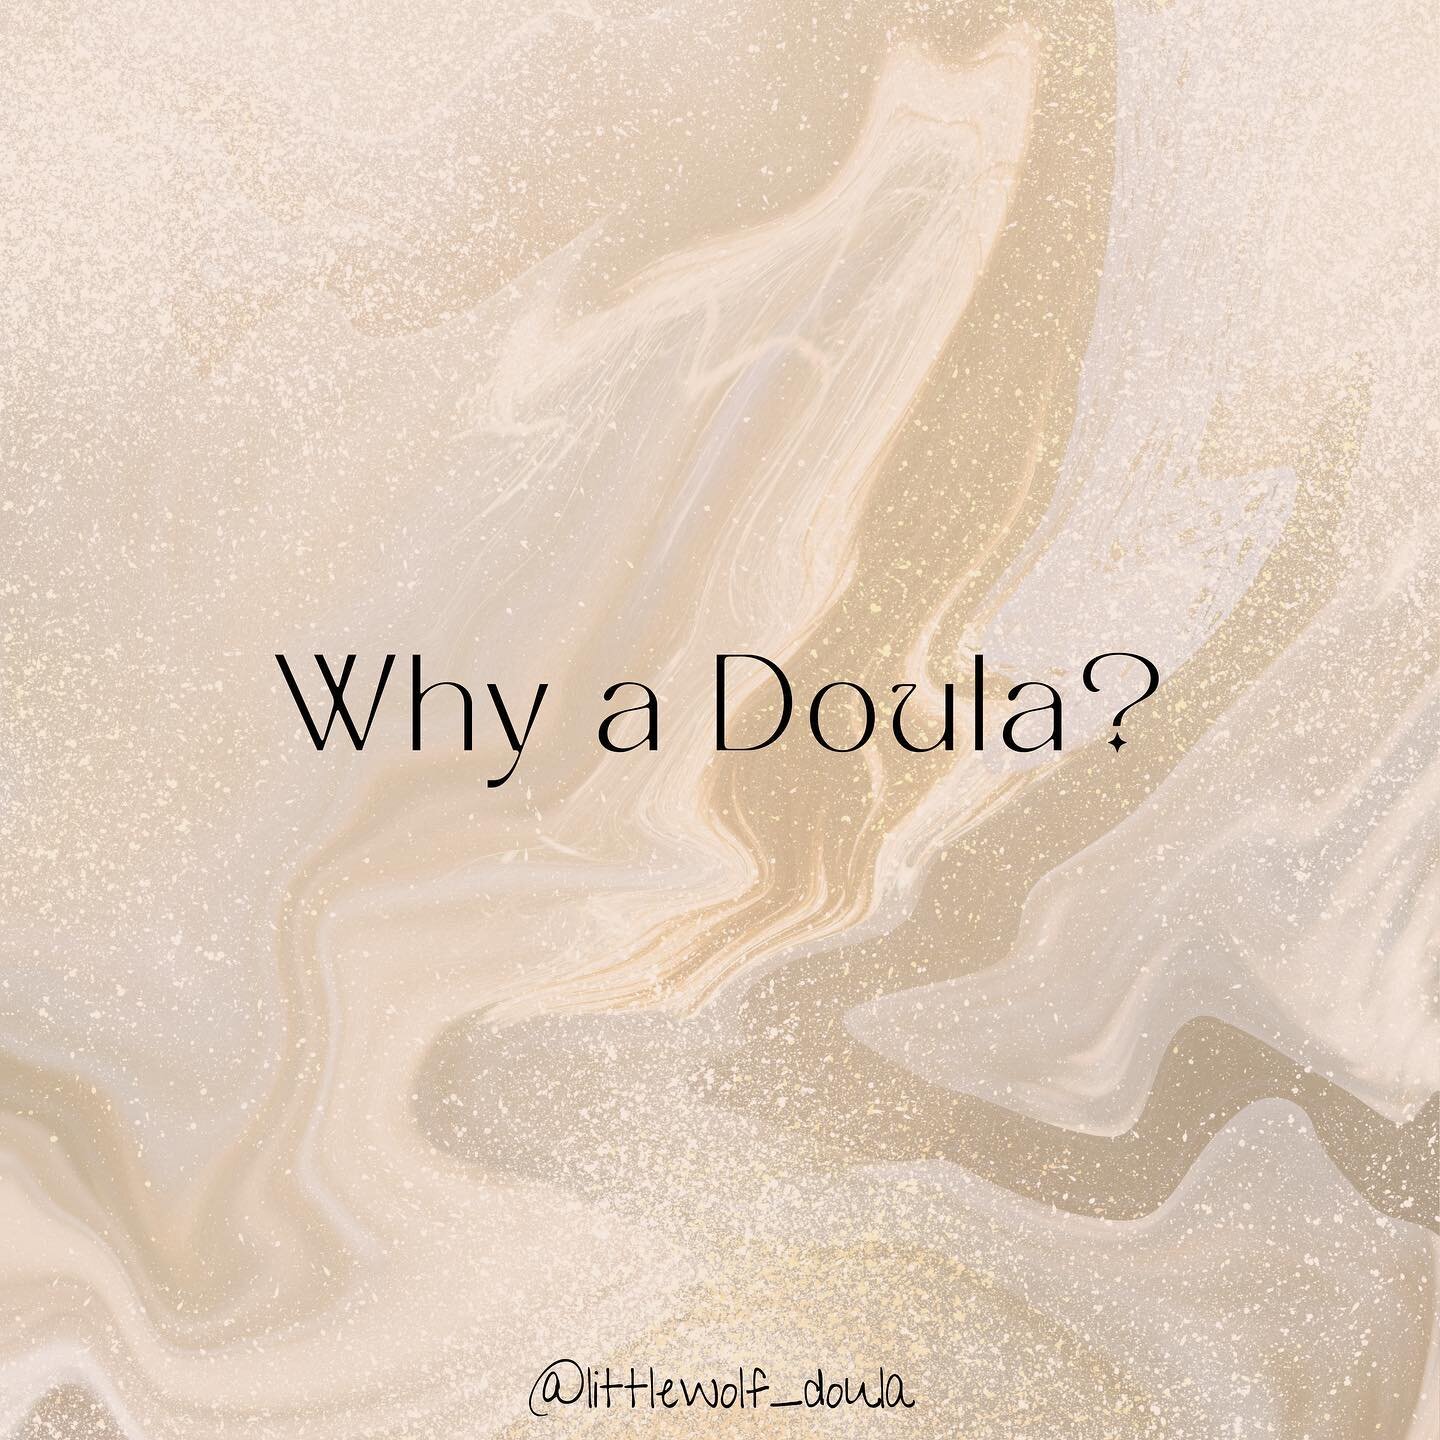 🤰 During pregnancy, the Doula and Birthing person develop a relationship in which the Birthing person feels free to ask questions, express fears/concerns, and take an active role in creating a Birth plan. 

🤰 Doulas provide invaluable resources to 